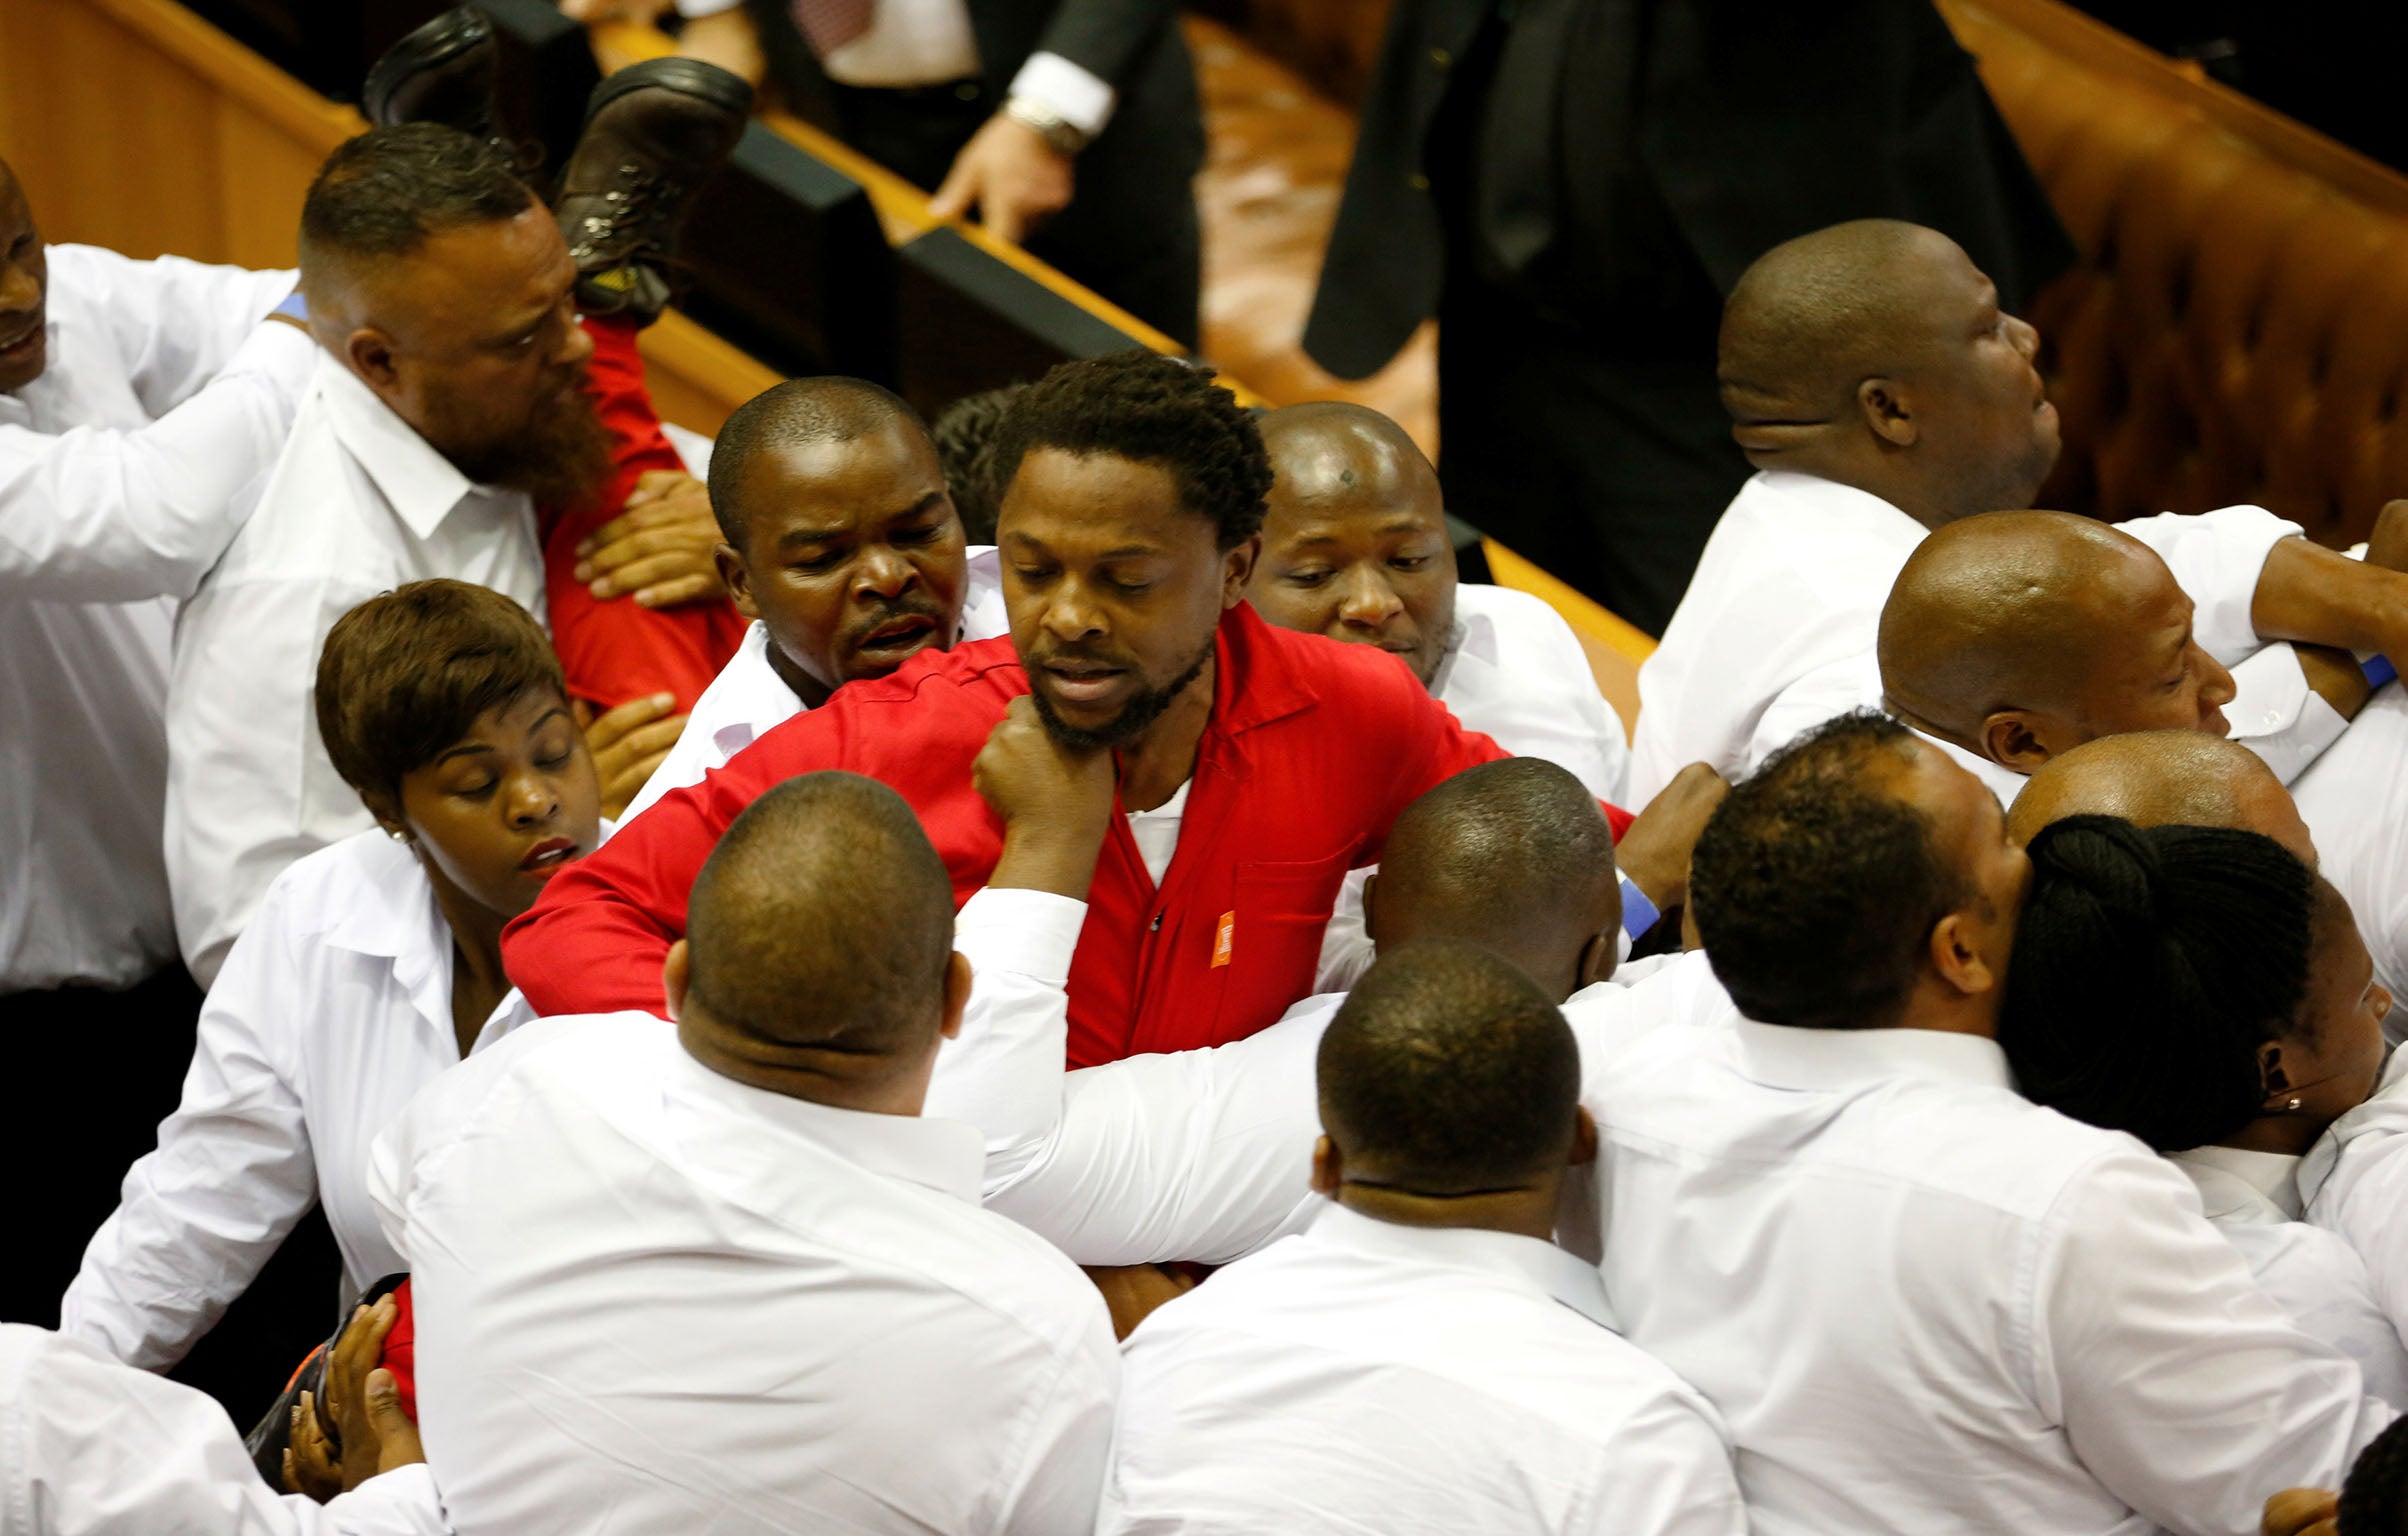 Security officials remove members of the Economic Freedom Fighters in the South African parliament